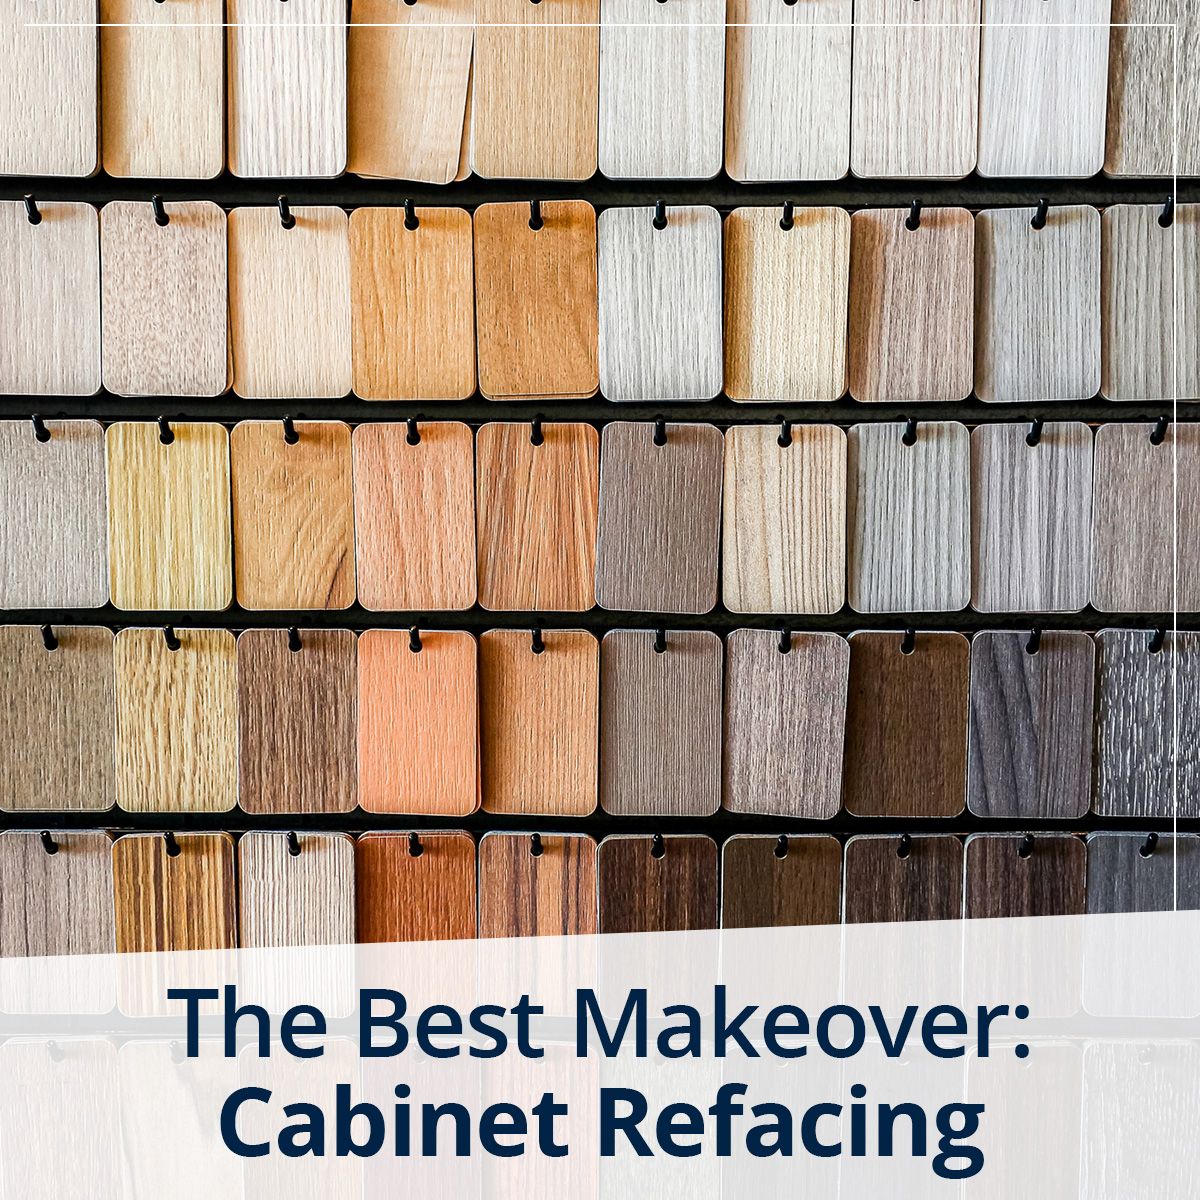 The Best Makeover: Cabinet Refacing